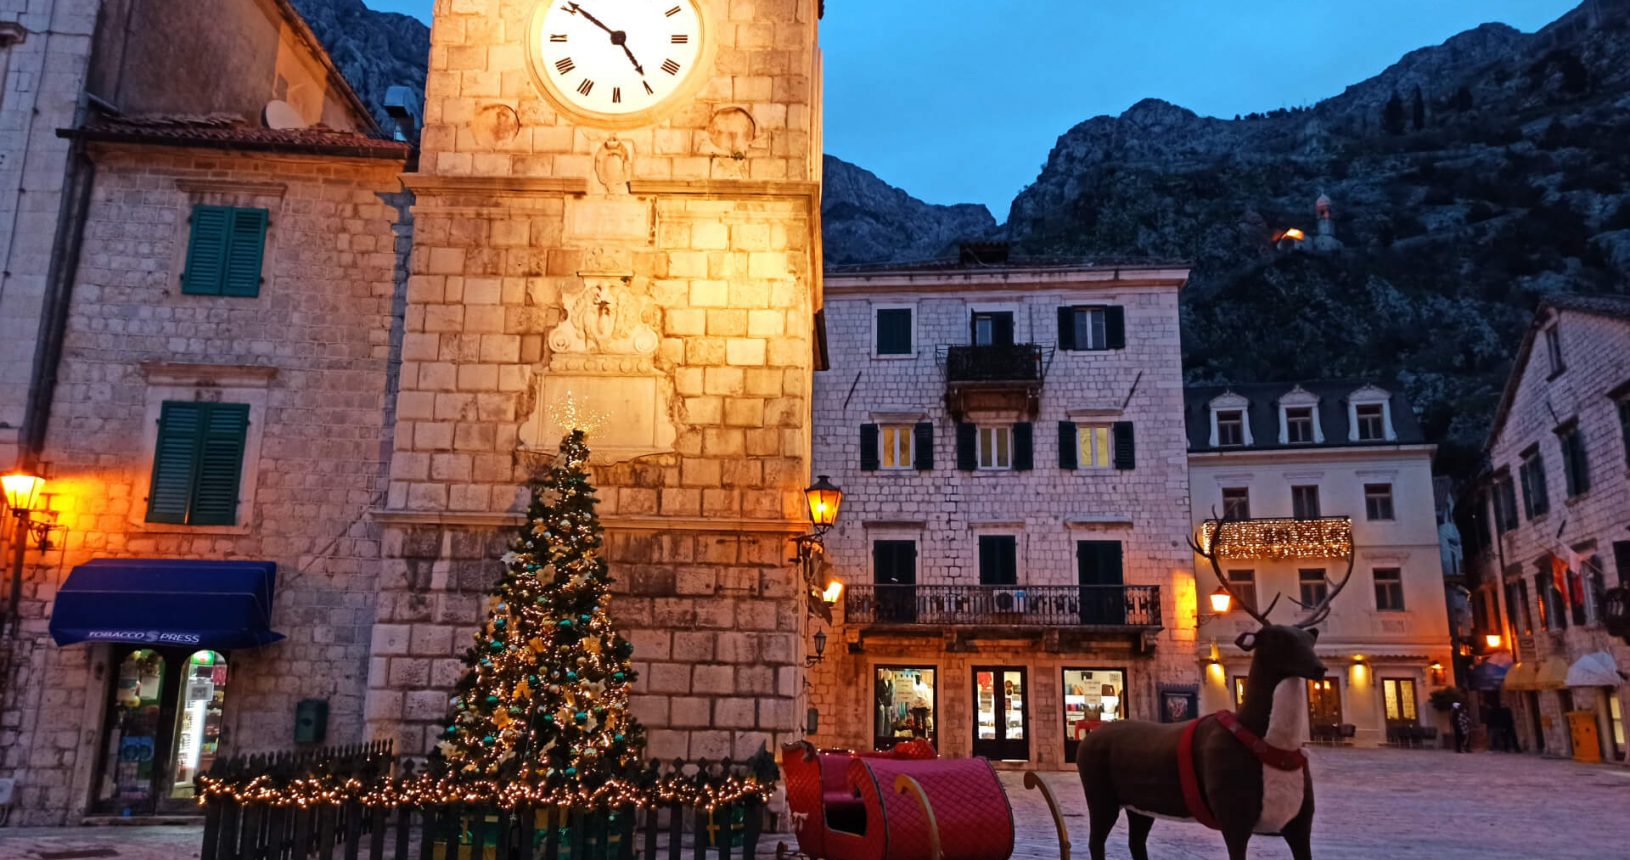 The main Christmas tree in Old Town Kotor